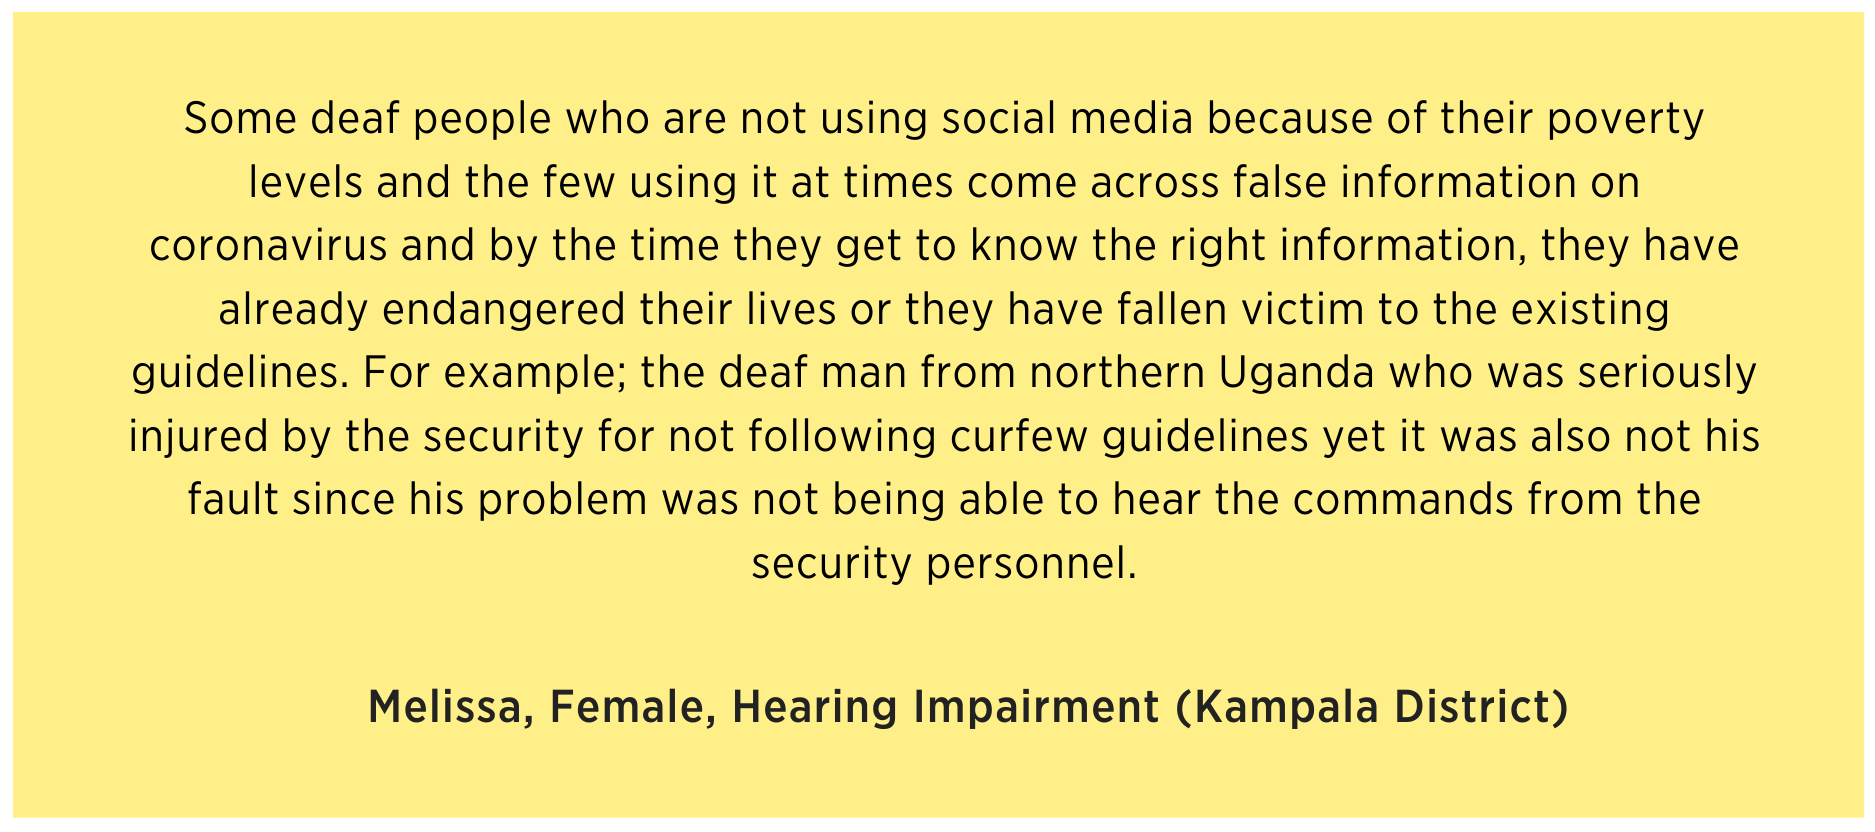 Melissa says Some deaf people who are not using social media because of their poverty levels and the few using it at times come across false information on coronavirus and by the time they get to know the right information, they have already endangered their lives or they have fallen victim to the existing guidelines. For example; the deaf man from northern Uganda who was seriously injured by the security for not following curfew guidelines yet it was also not his fault since his problem was not being able to hear the commands from the security personnel.